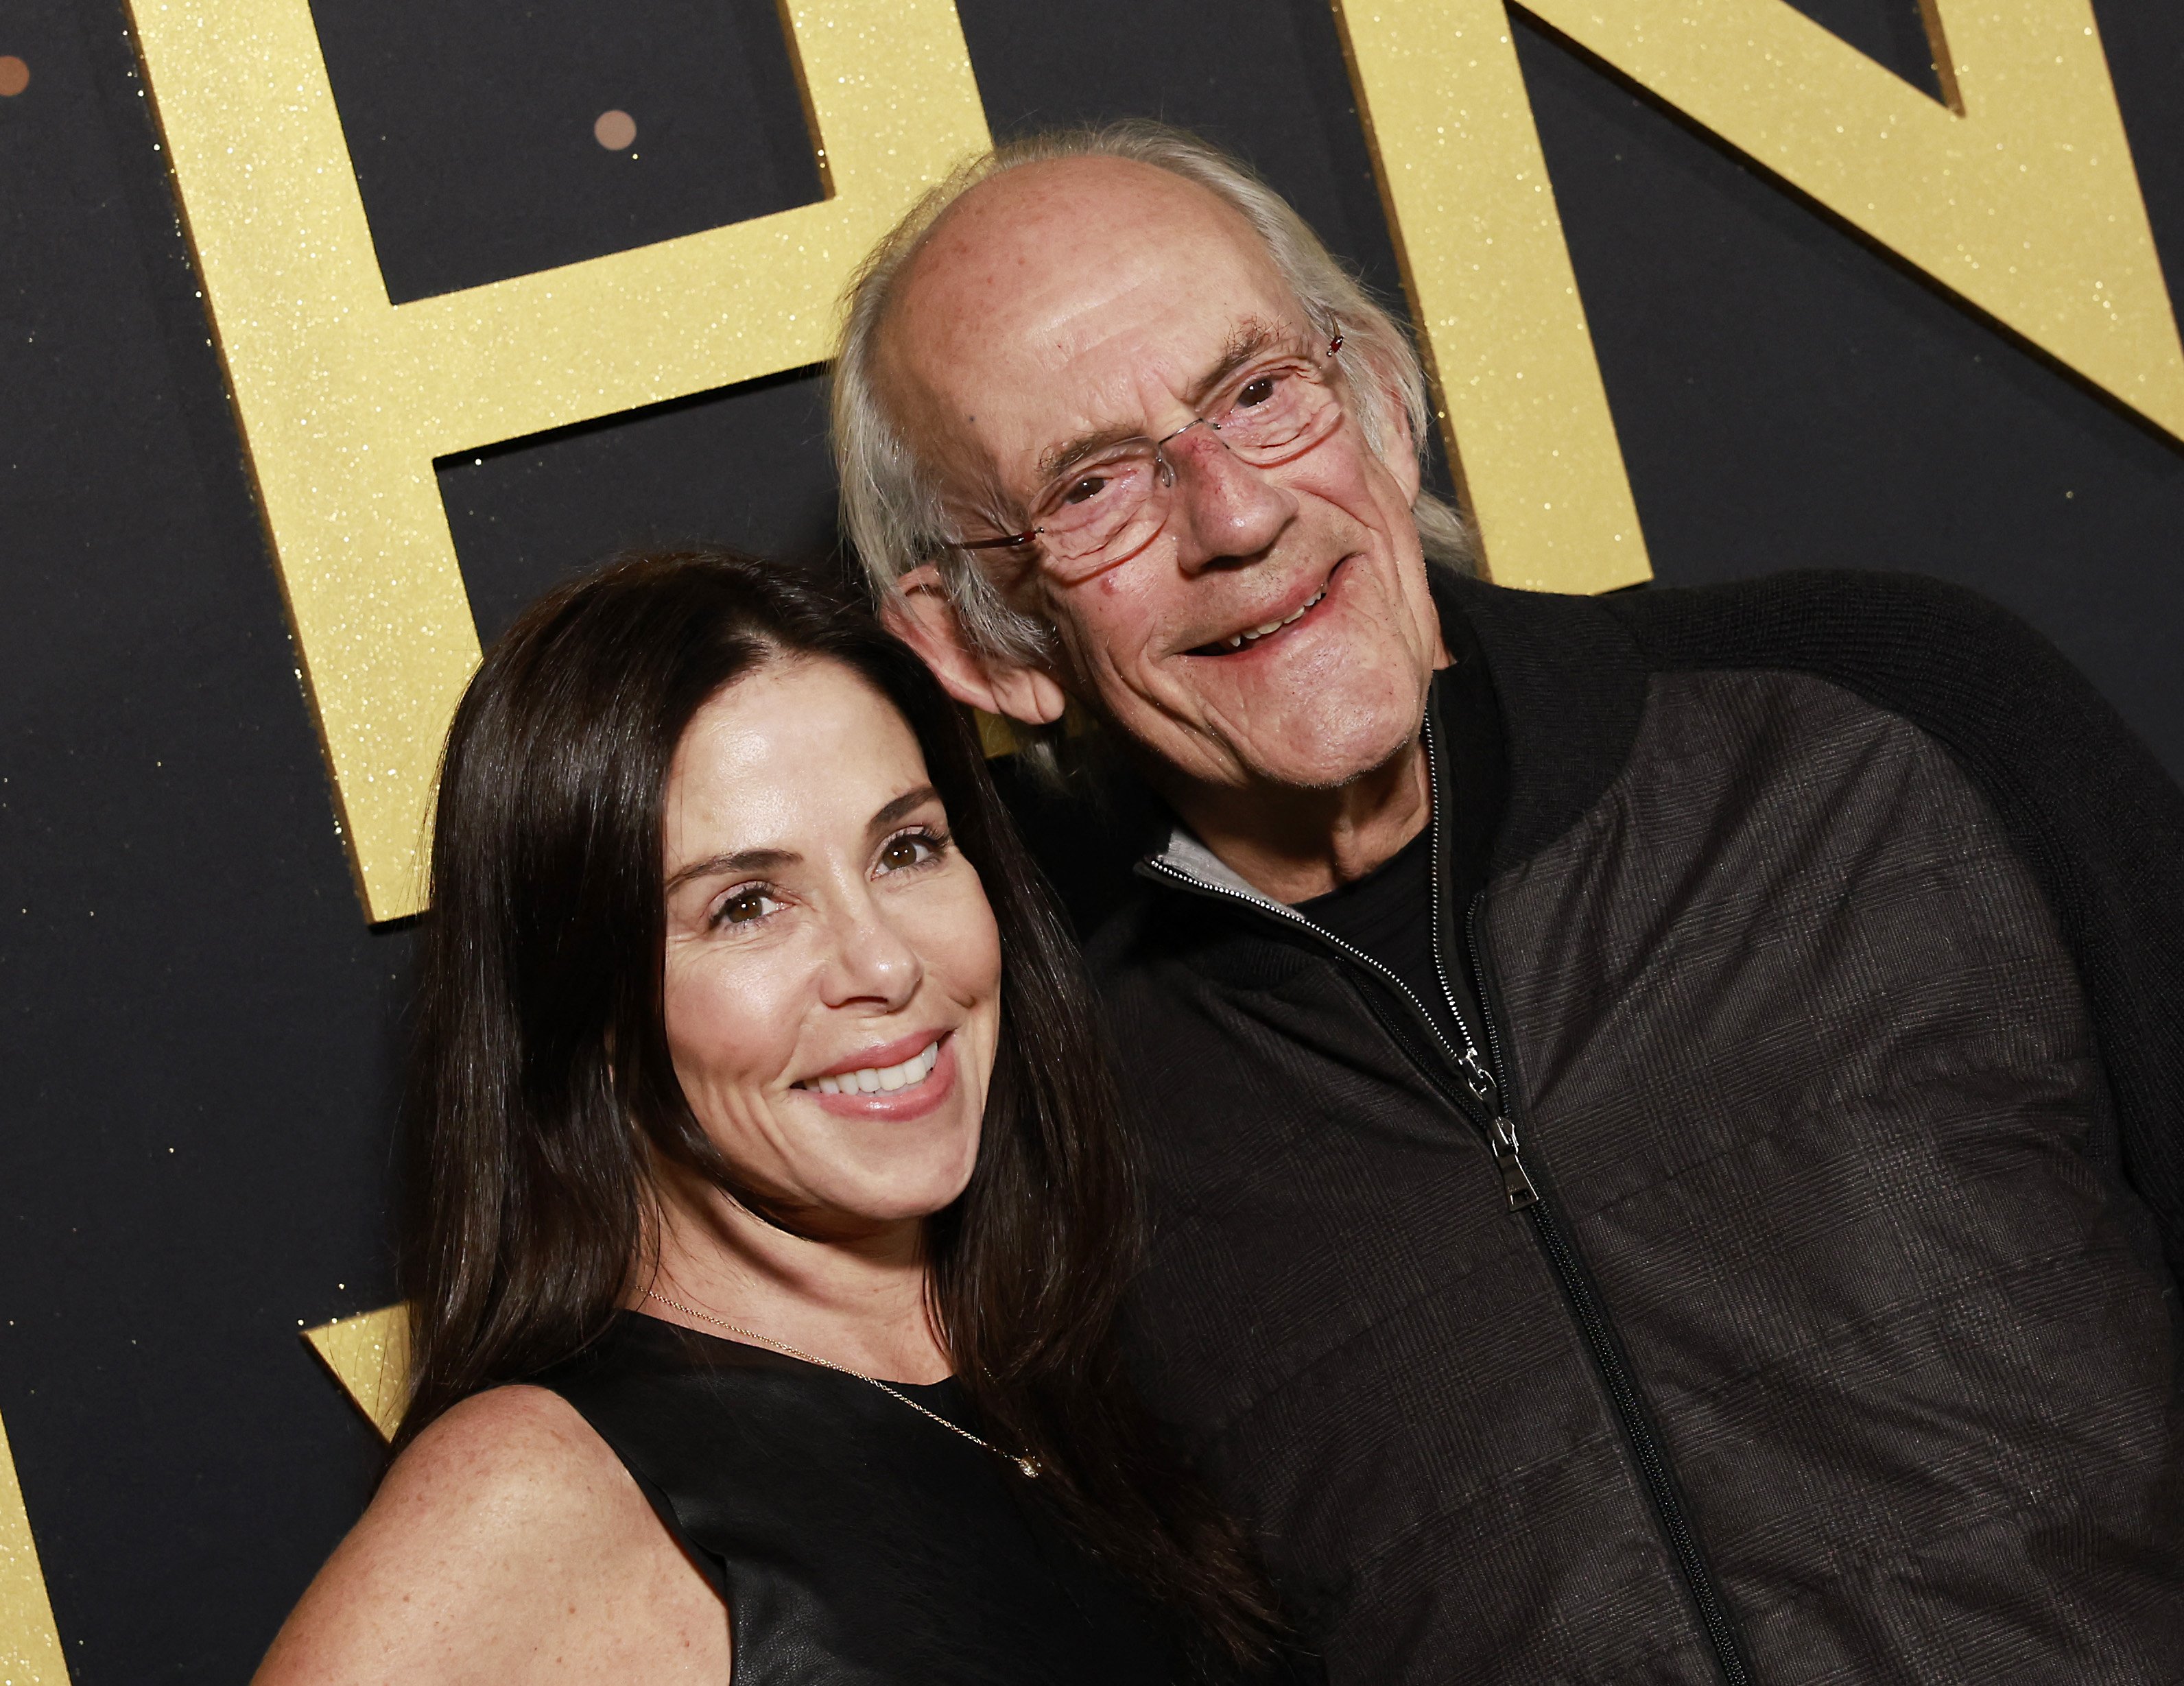 Christopher Lloyd and his fifth wife, Lisa Loiacono, at the Dodger Stadium, Los Angeles, CA, during Elton John's "Farewell Yellow Brick Road Tour" on November 20, 2022. | Source: Getty Images